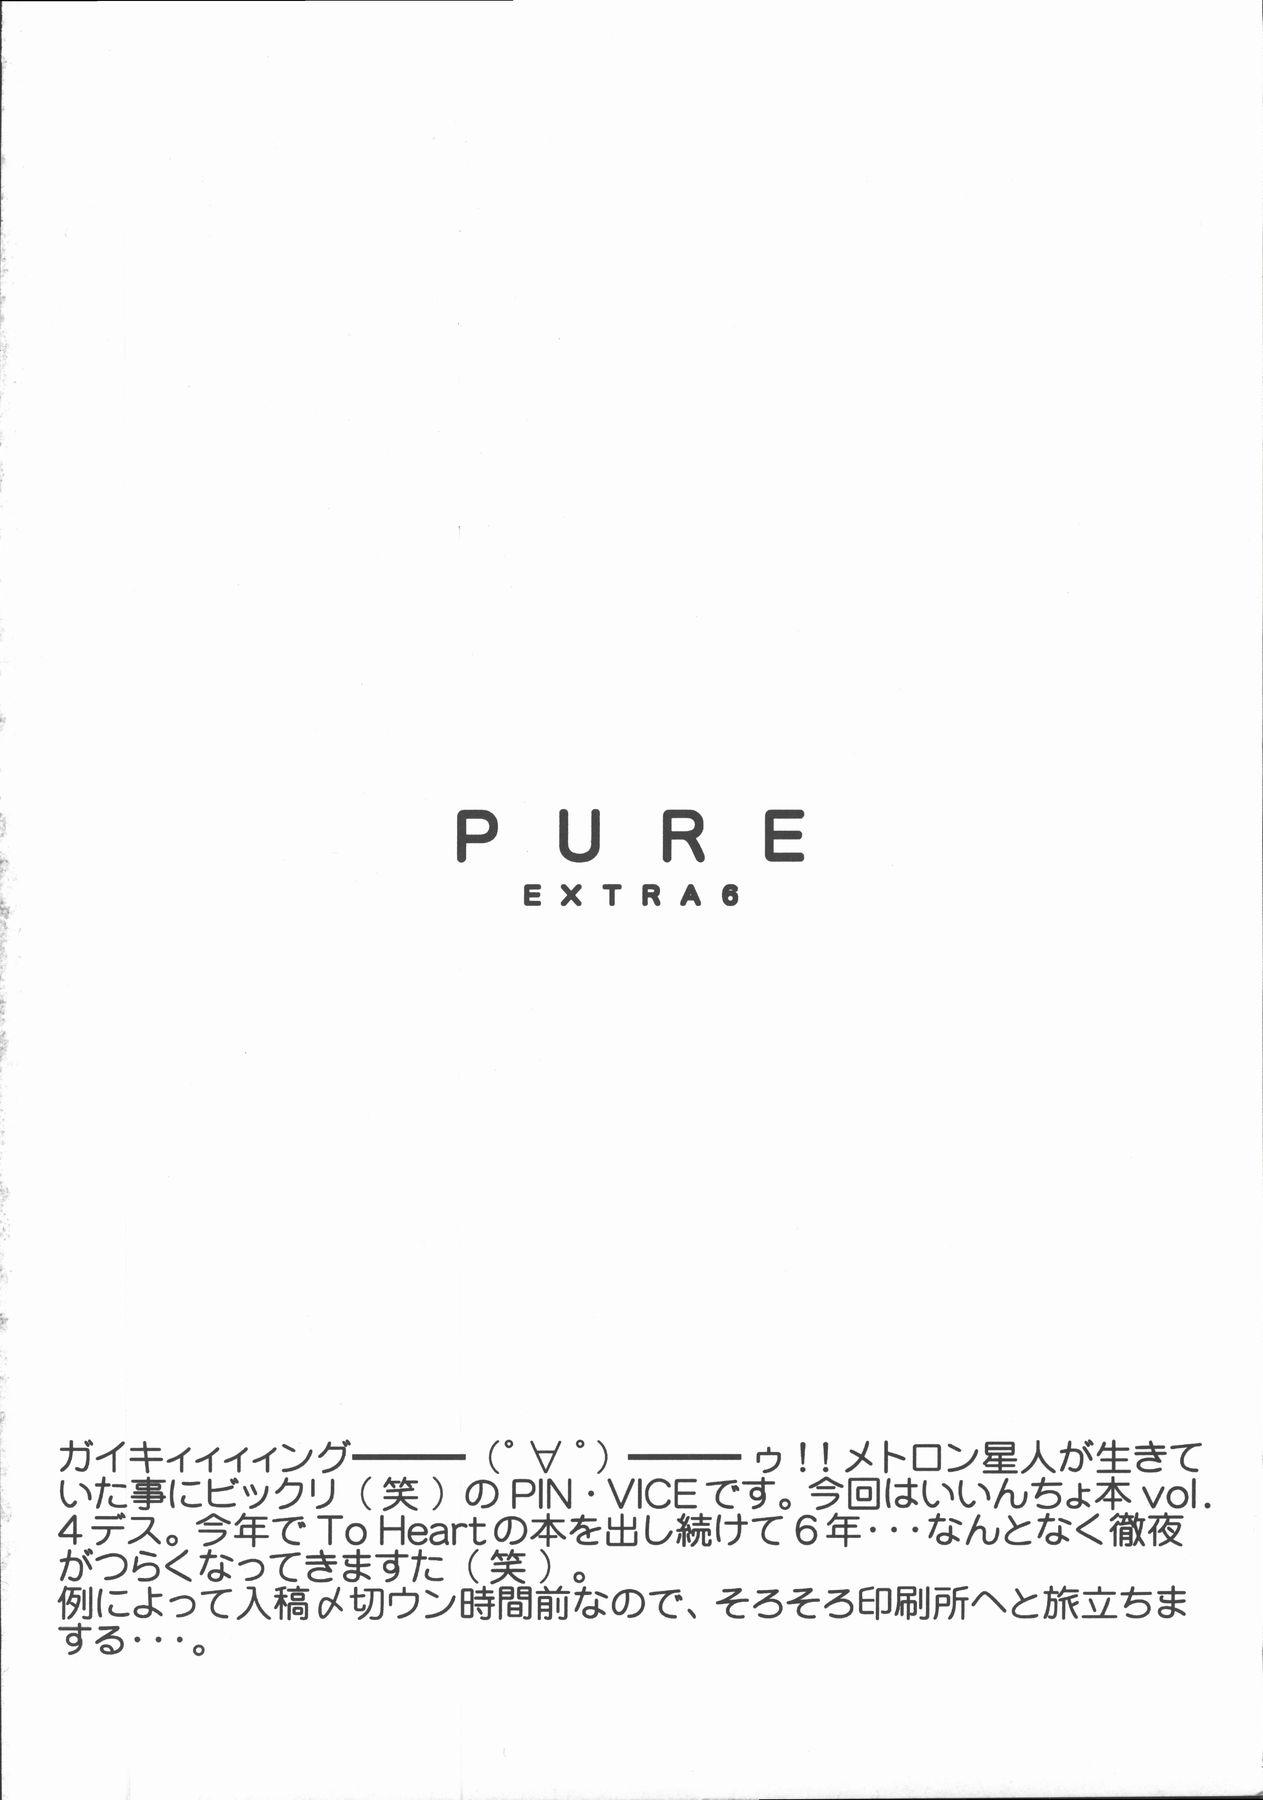 Pure Extra 6 3